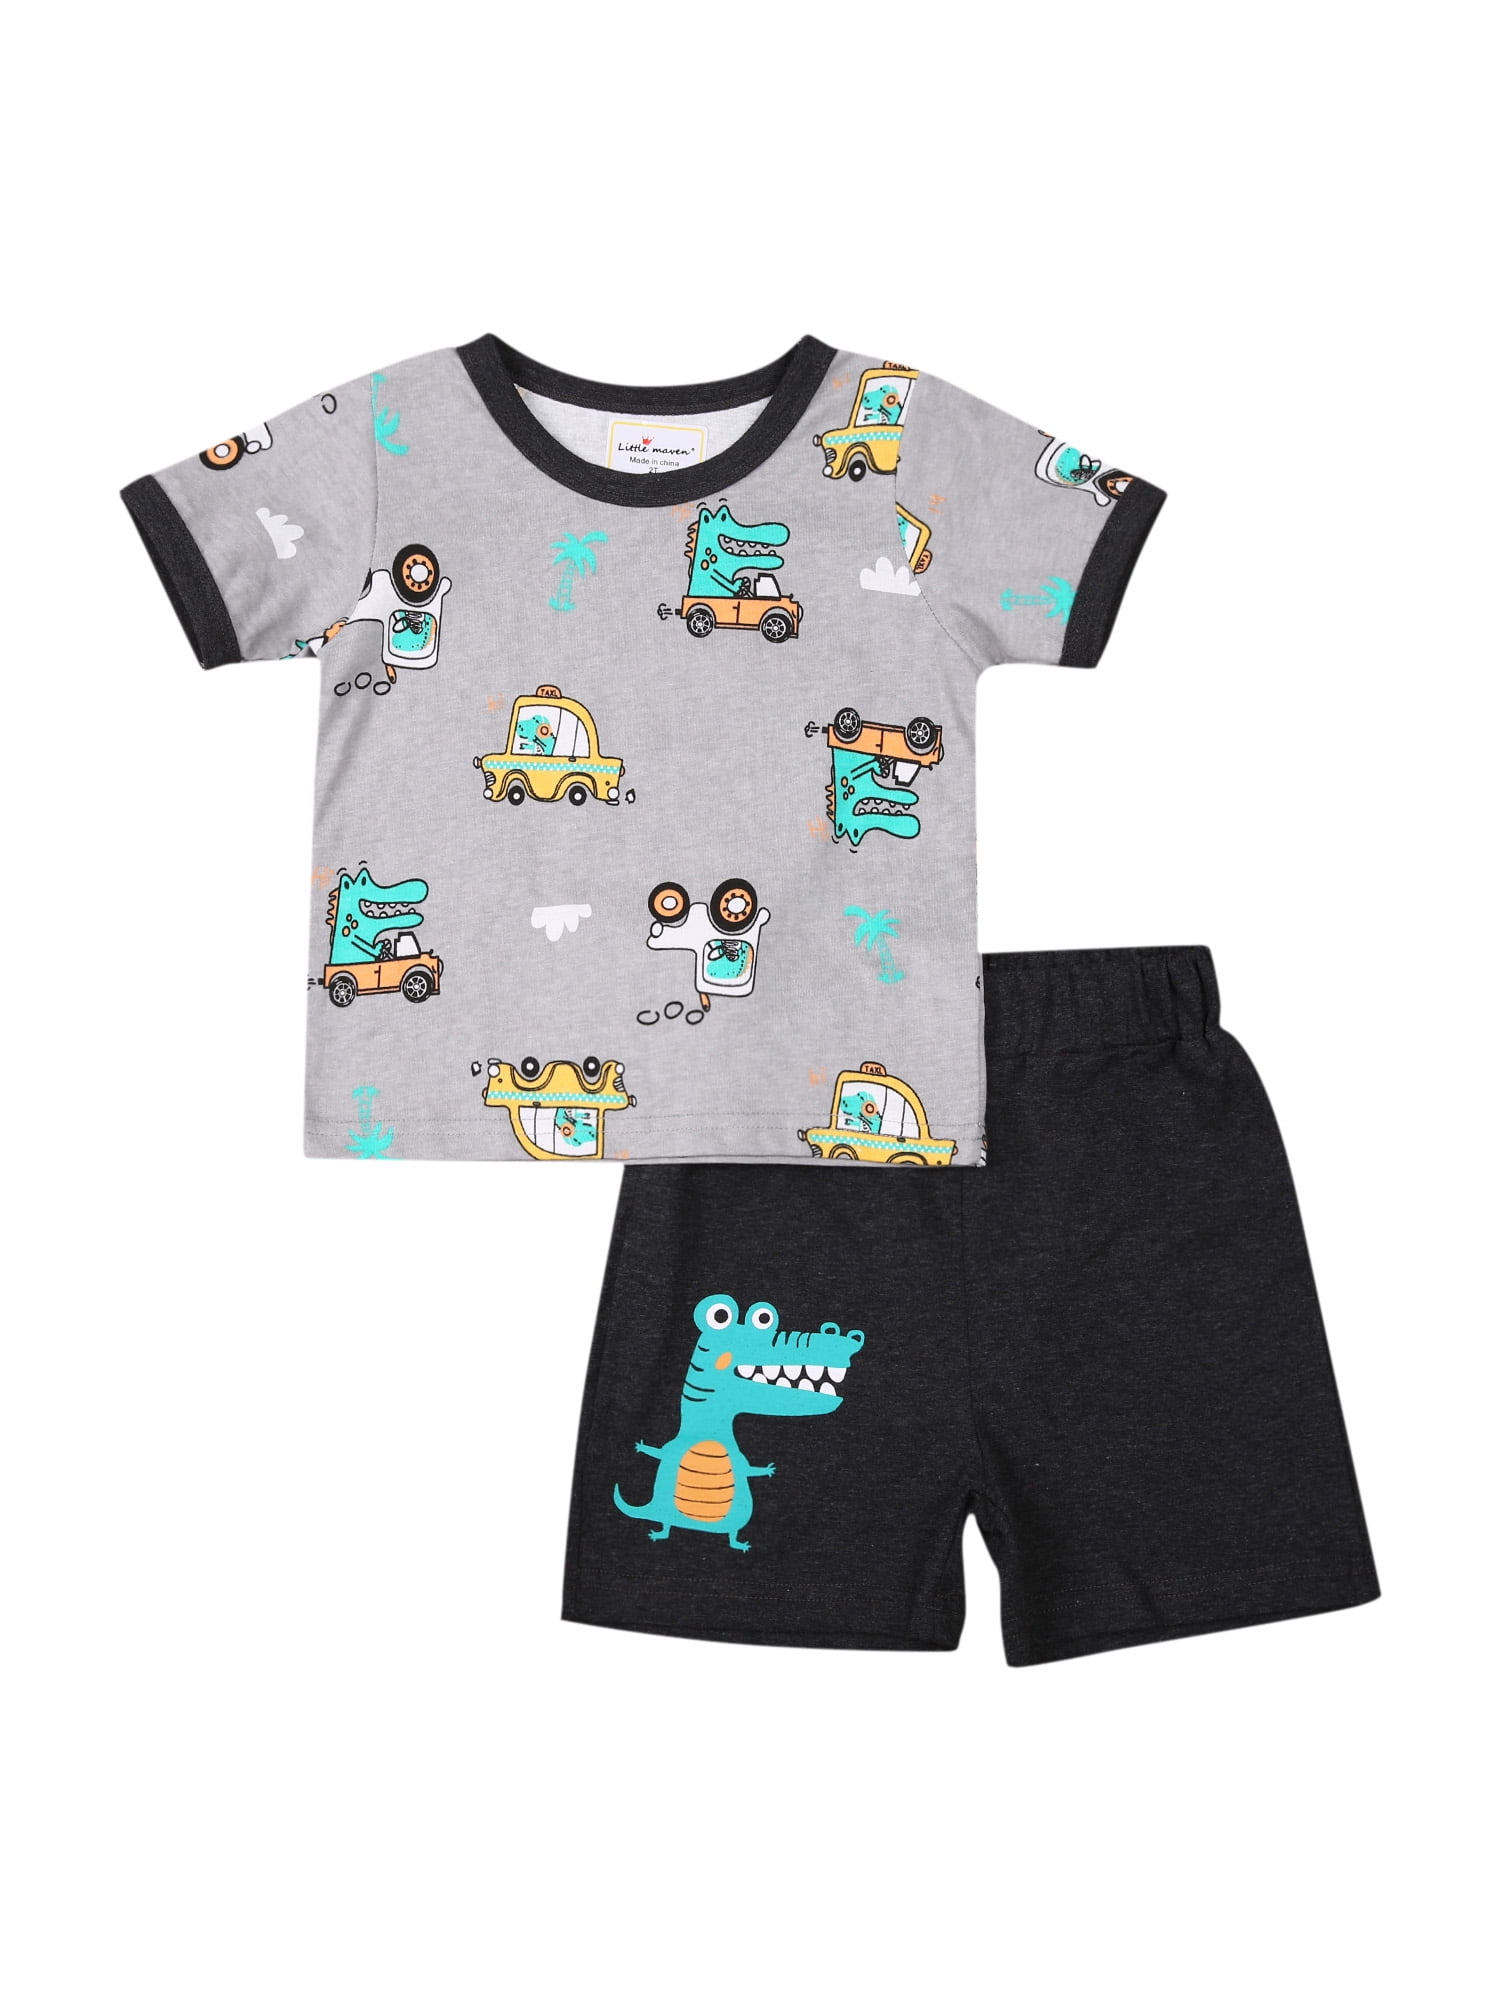 Details about   High Quality BABY Toddler GIRL Short Sleeved Top T-Shirt or Pants Clothing 